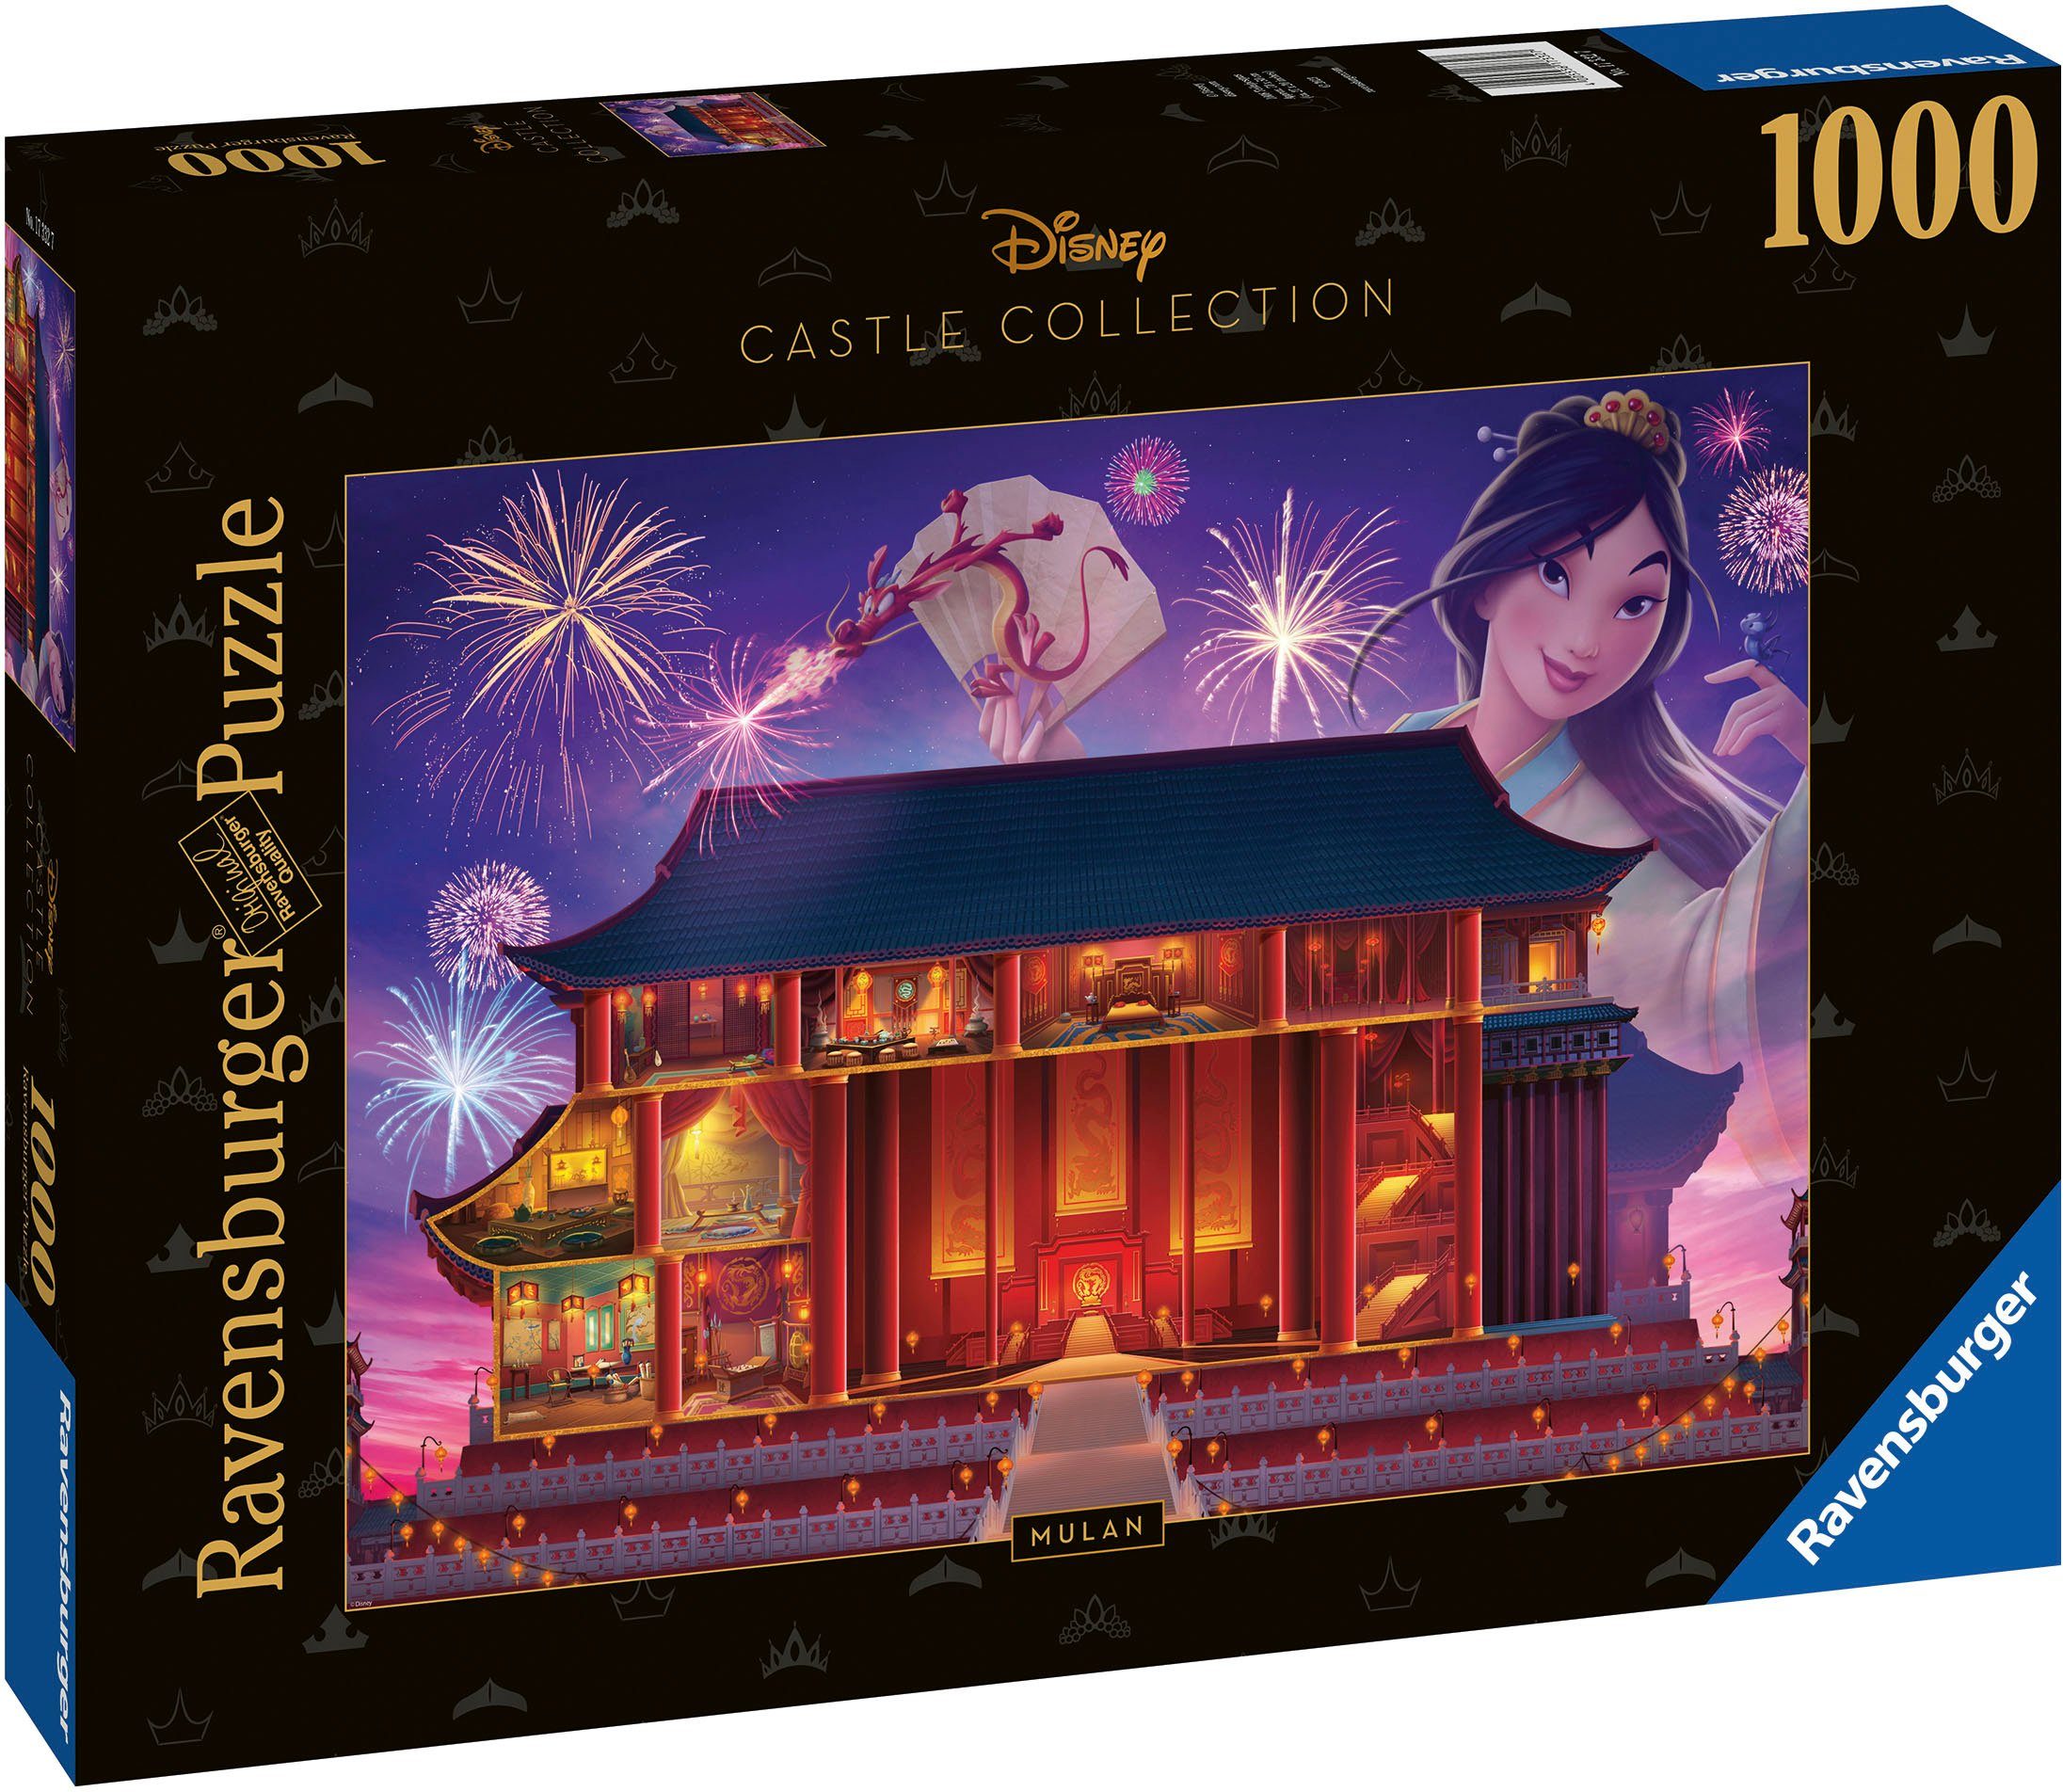 Castle Puzzle Disney Germany Made Puzzleteile, Mulan, in 1000 Ravensburger Collection,